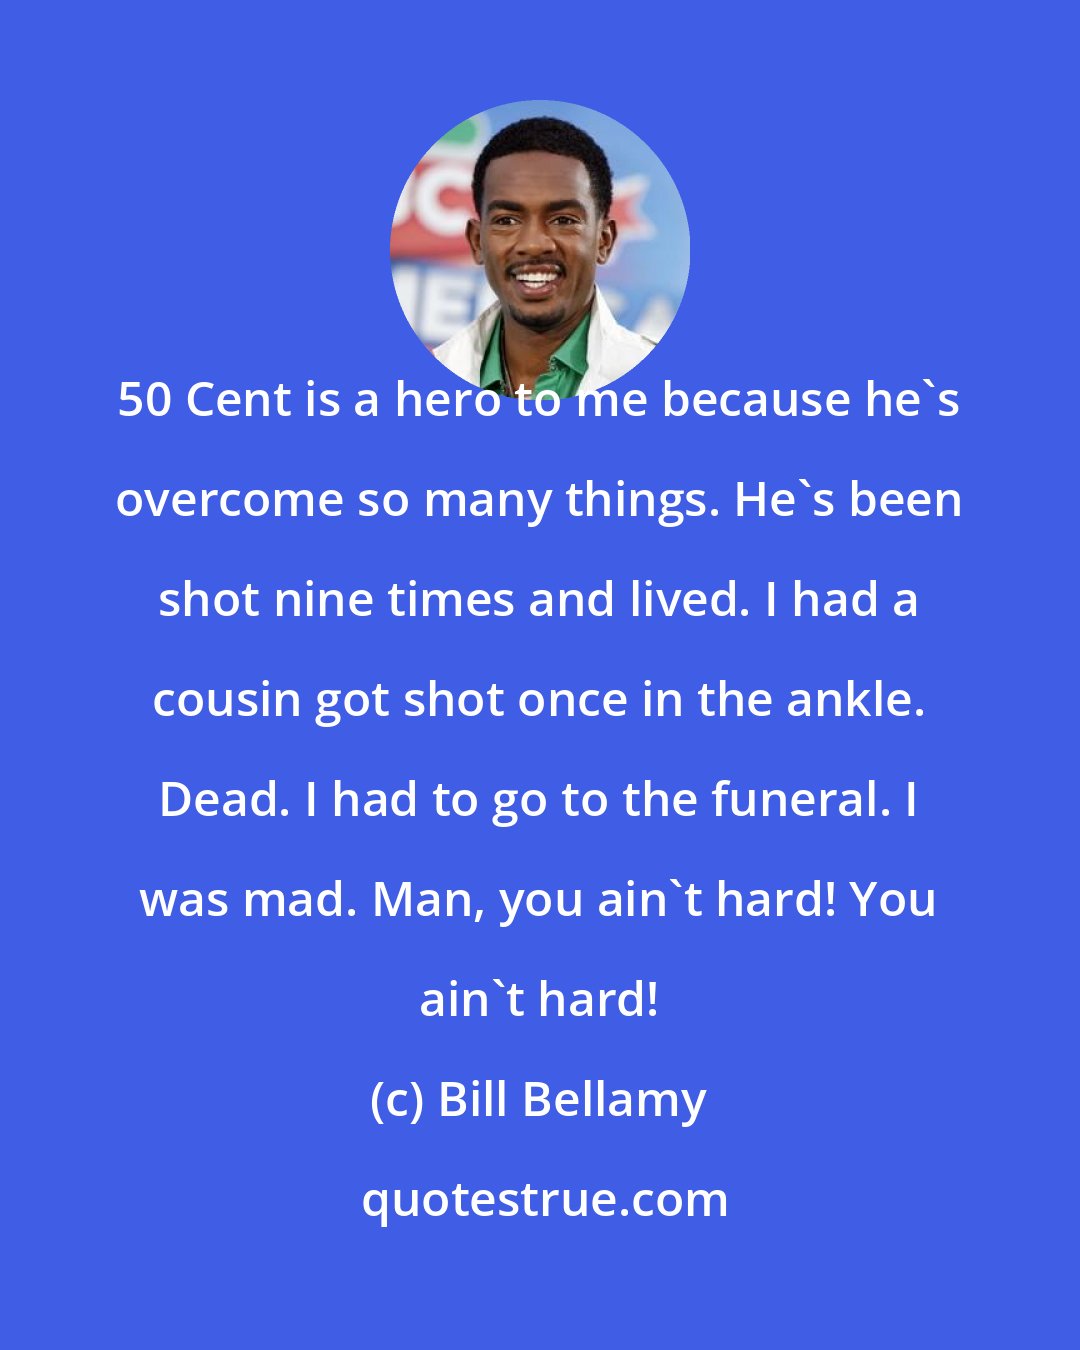 Bill Bellamy: 50 Cent is a hero to me because he's overcome so many things. He's been shot nine times and lived. I had a cousin got shot once in the ankle. Dead. I had to go to the funeral. I was mad. Man, you ain't hard! You ain't hard!